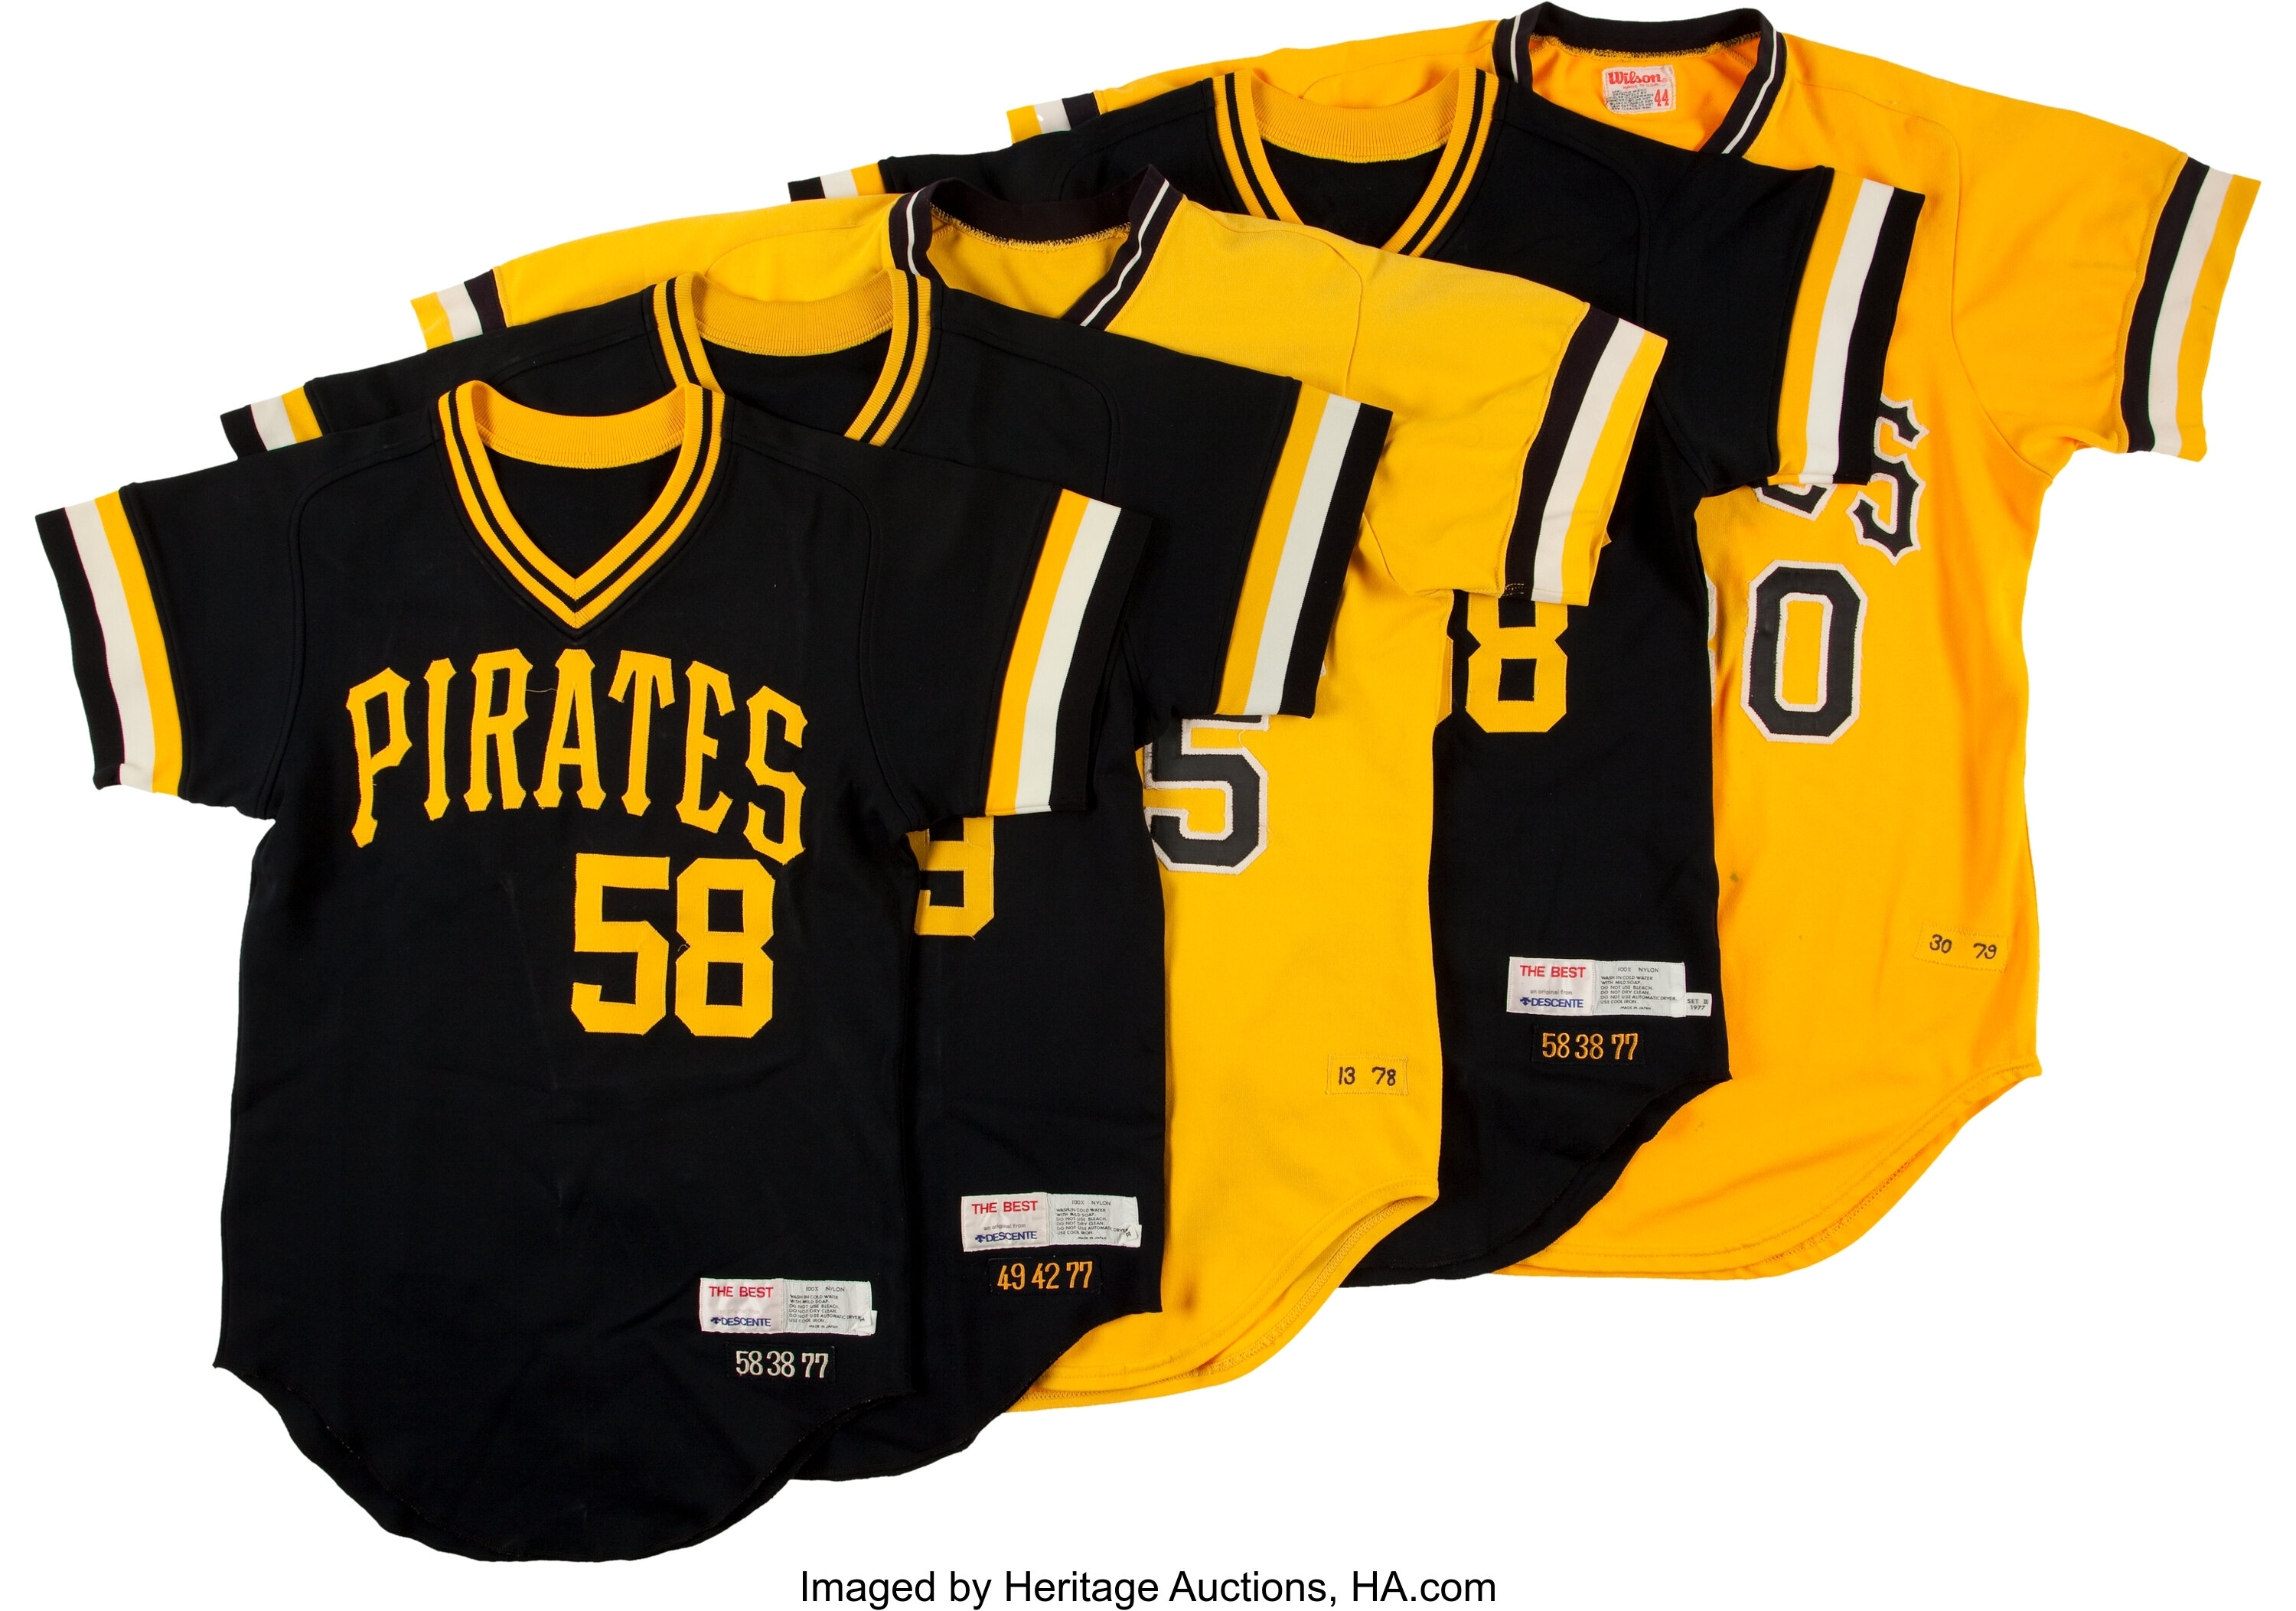 1970's Pittsburgh Pirates Uniforms Balance of Collection.